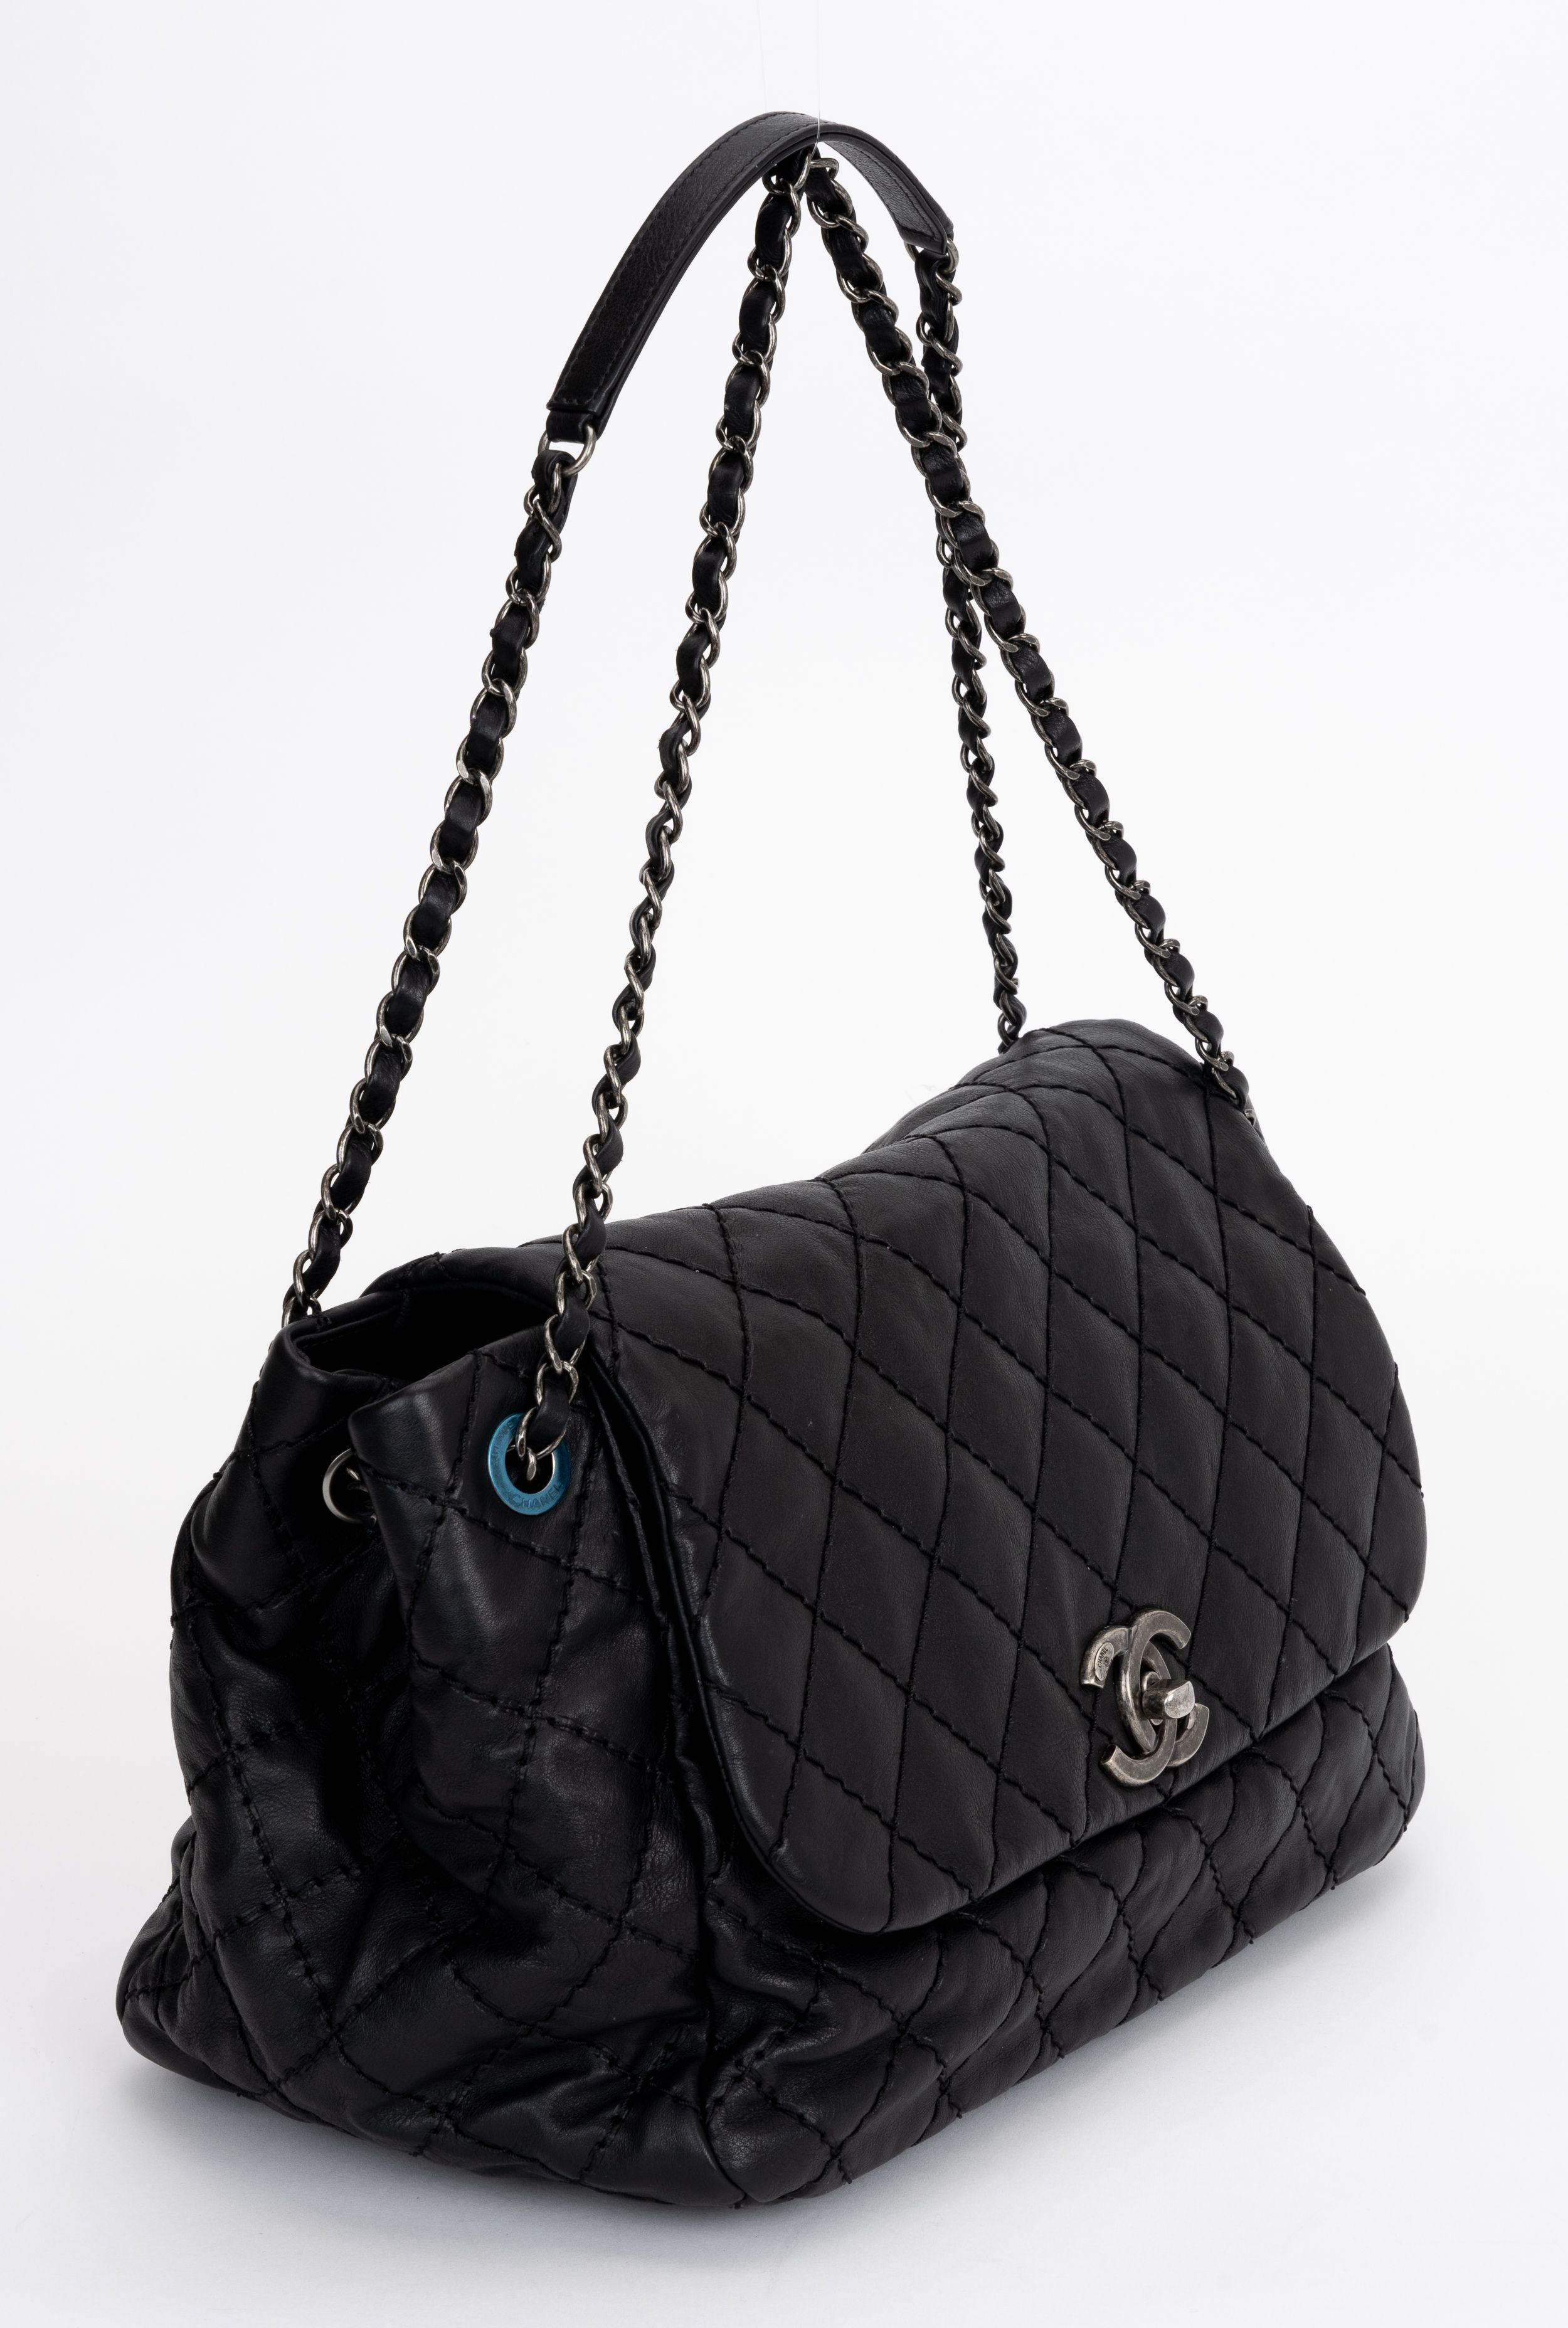 The Chanel Stitch It Shoulder Bag in Calfskin Leather features a leather and chain entwined handle and CC turn lock closure. One interior zipper pocket. Never used, plastic on hardware.
Shoulder drop 9